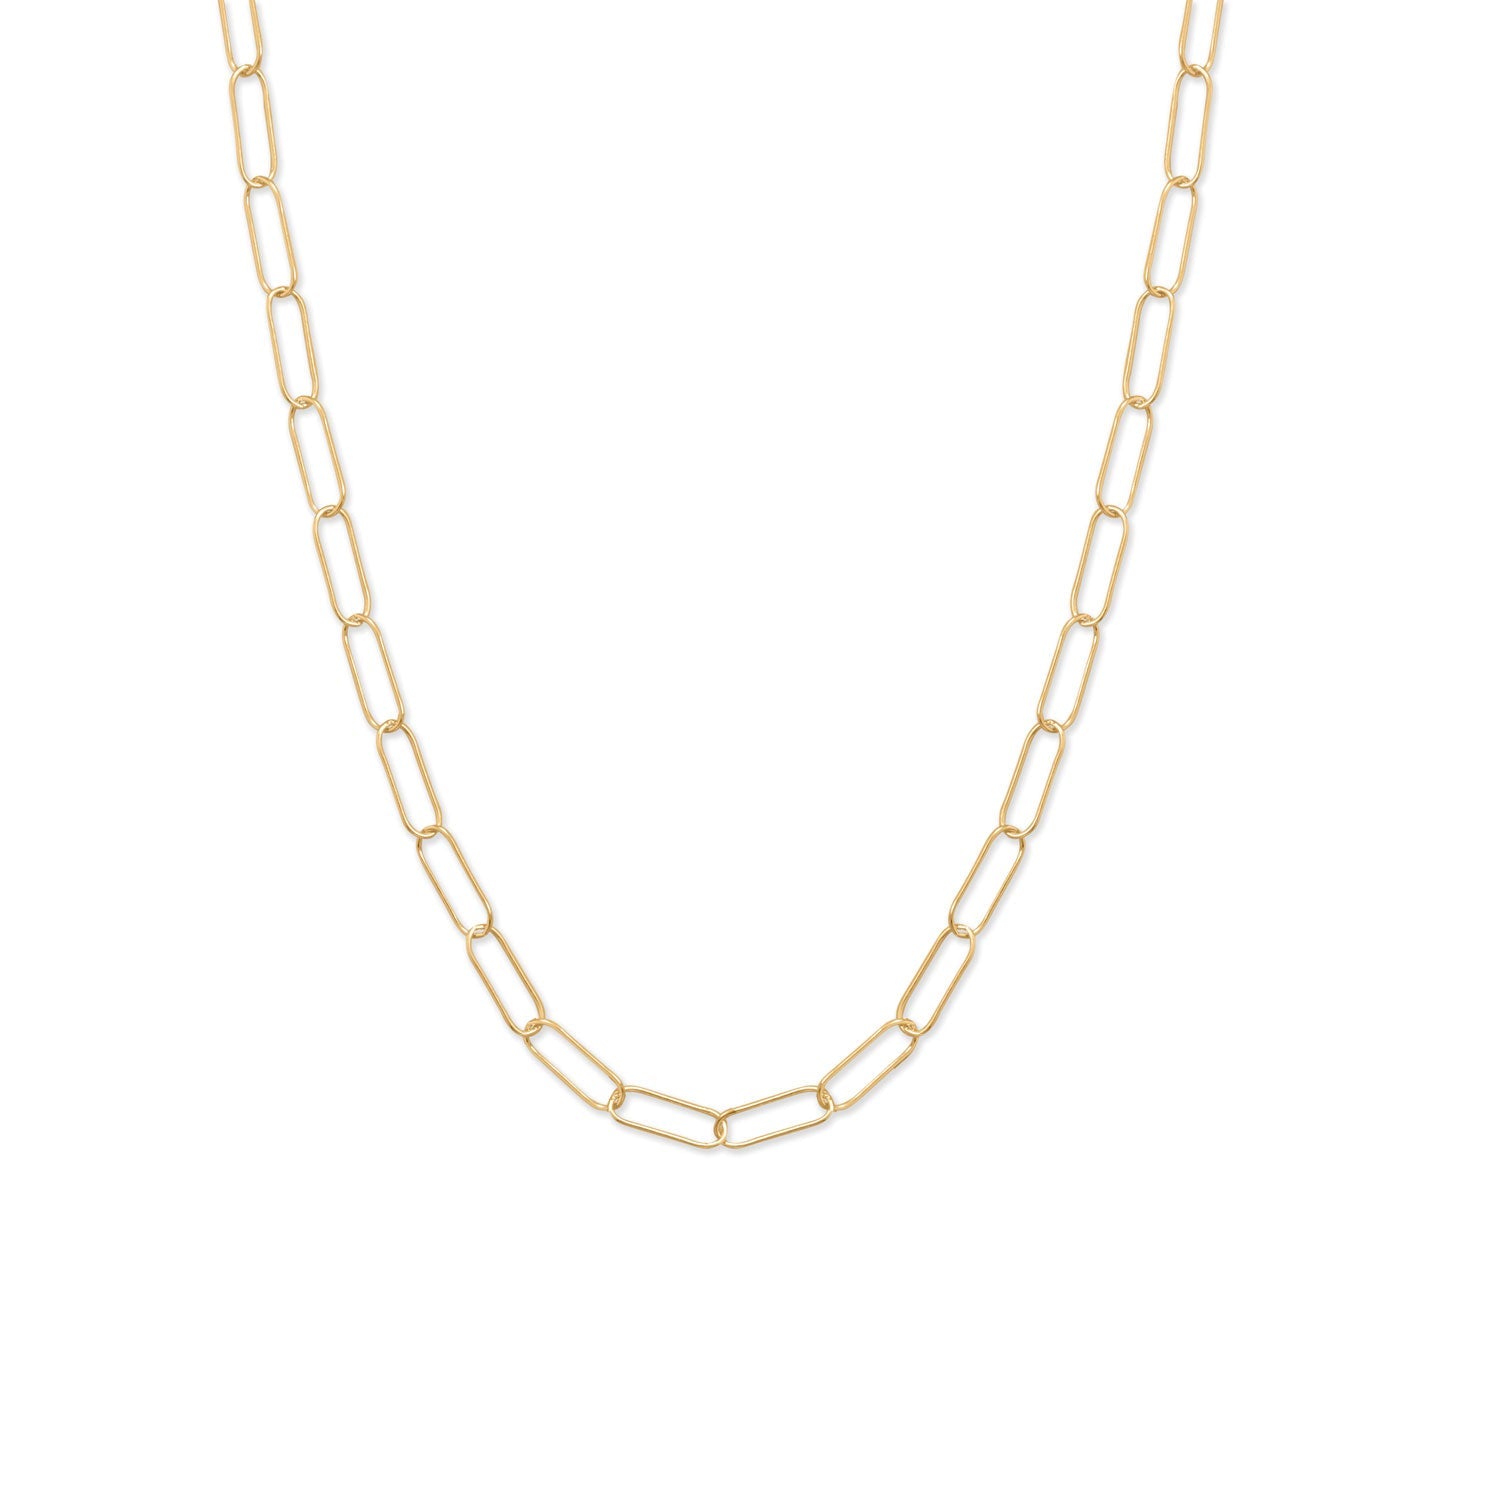 18" 14/20 Gold Filled Paperclip Necklace